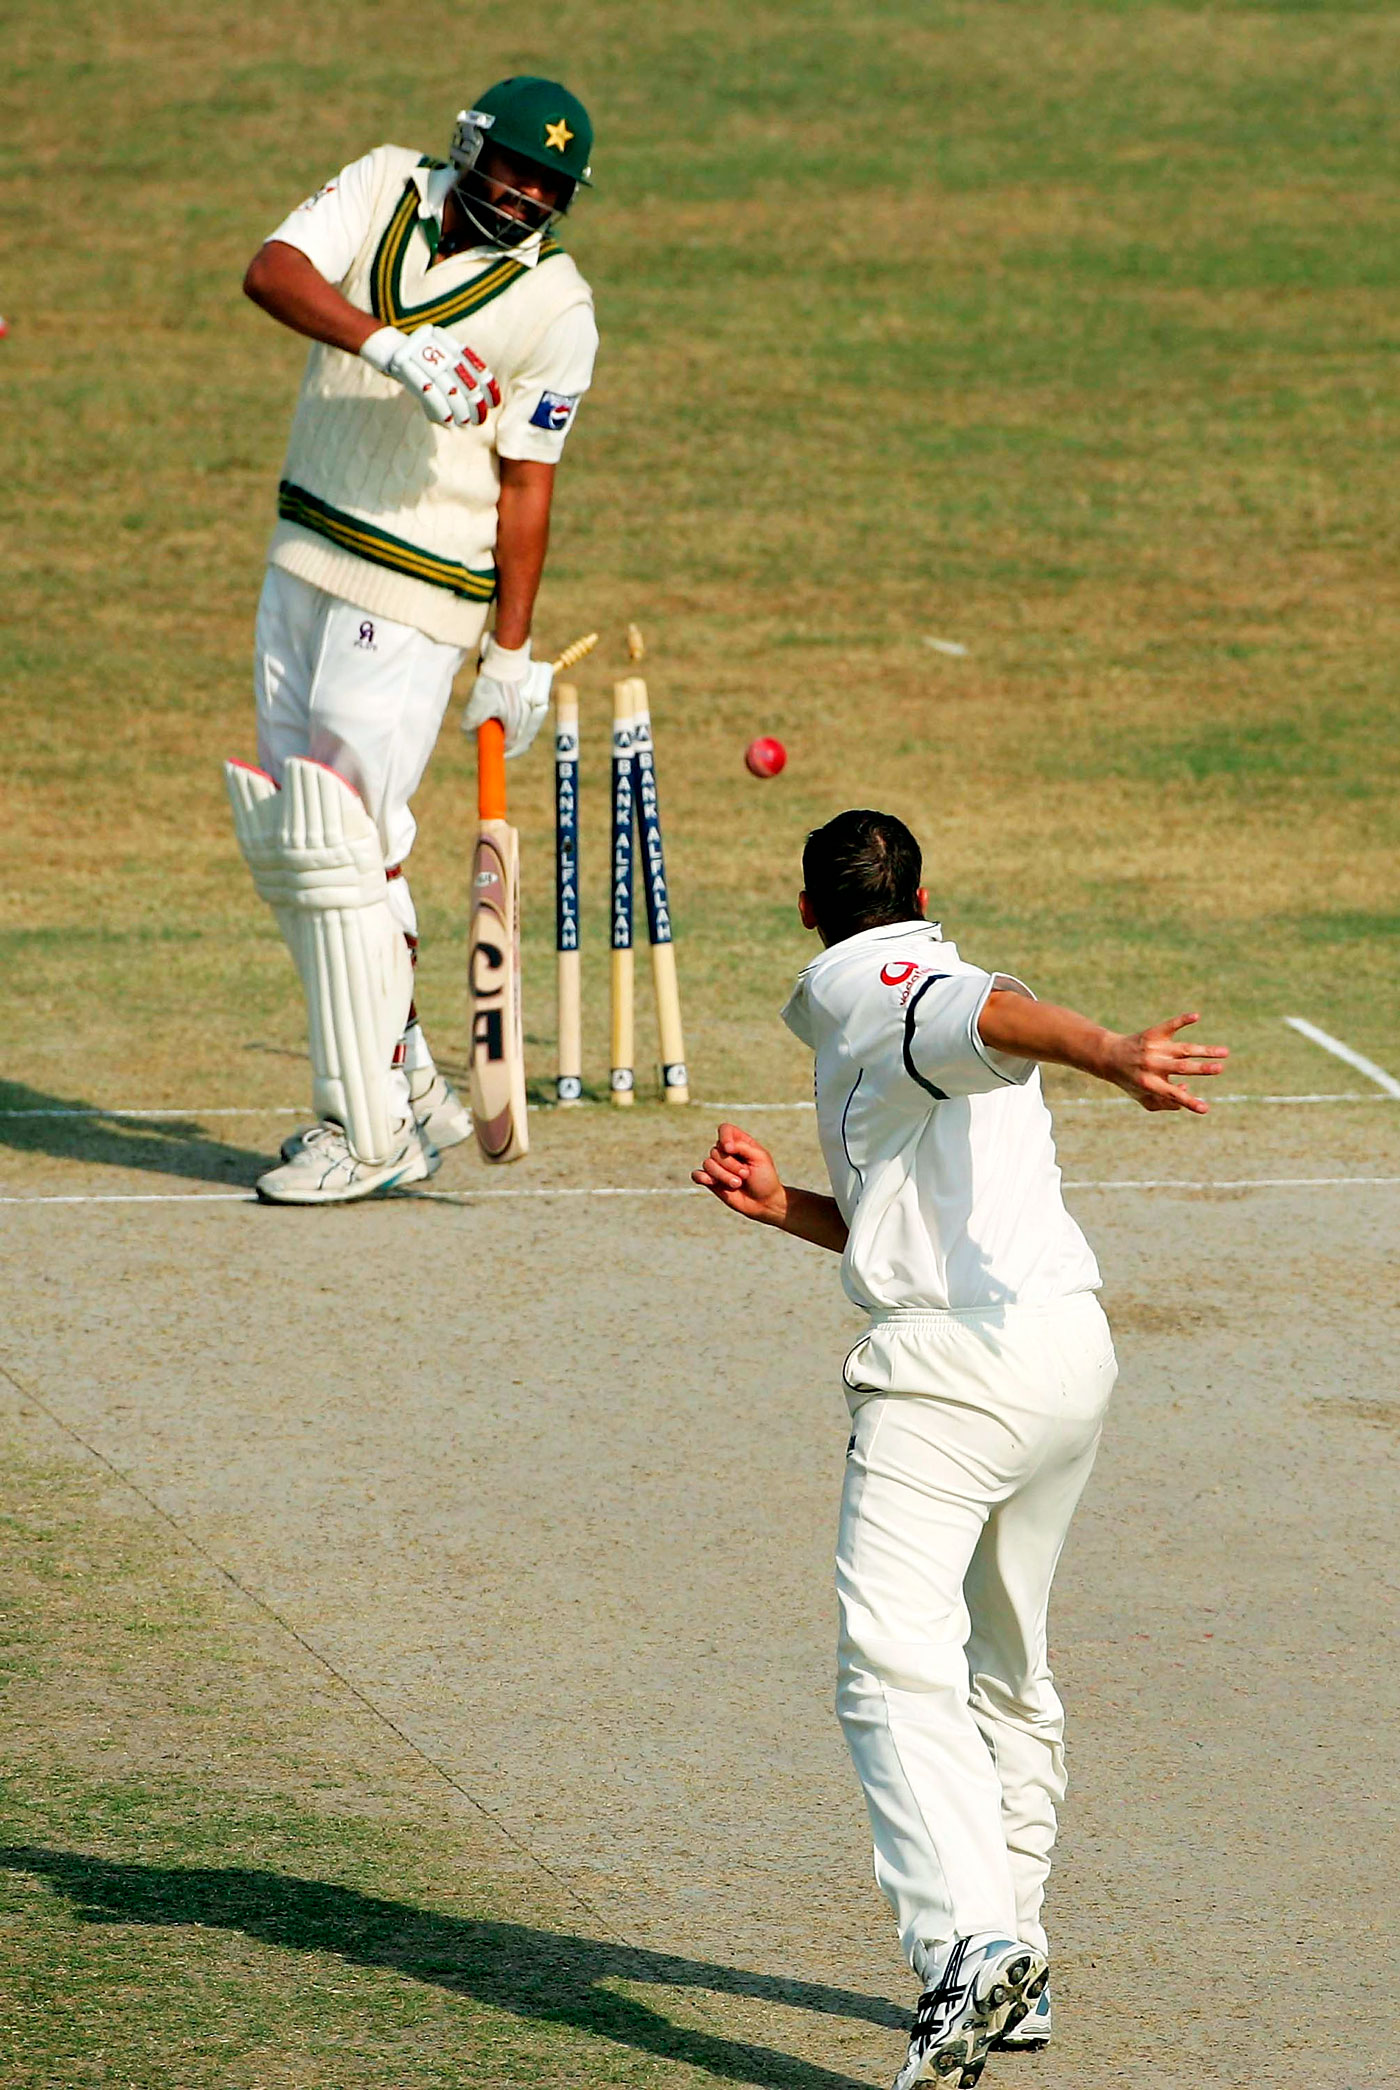 Harmison throws the ball at the stumps, Inzamam tries to avoid the ball